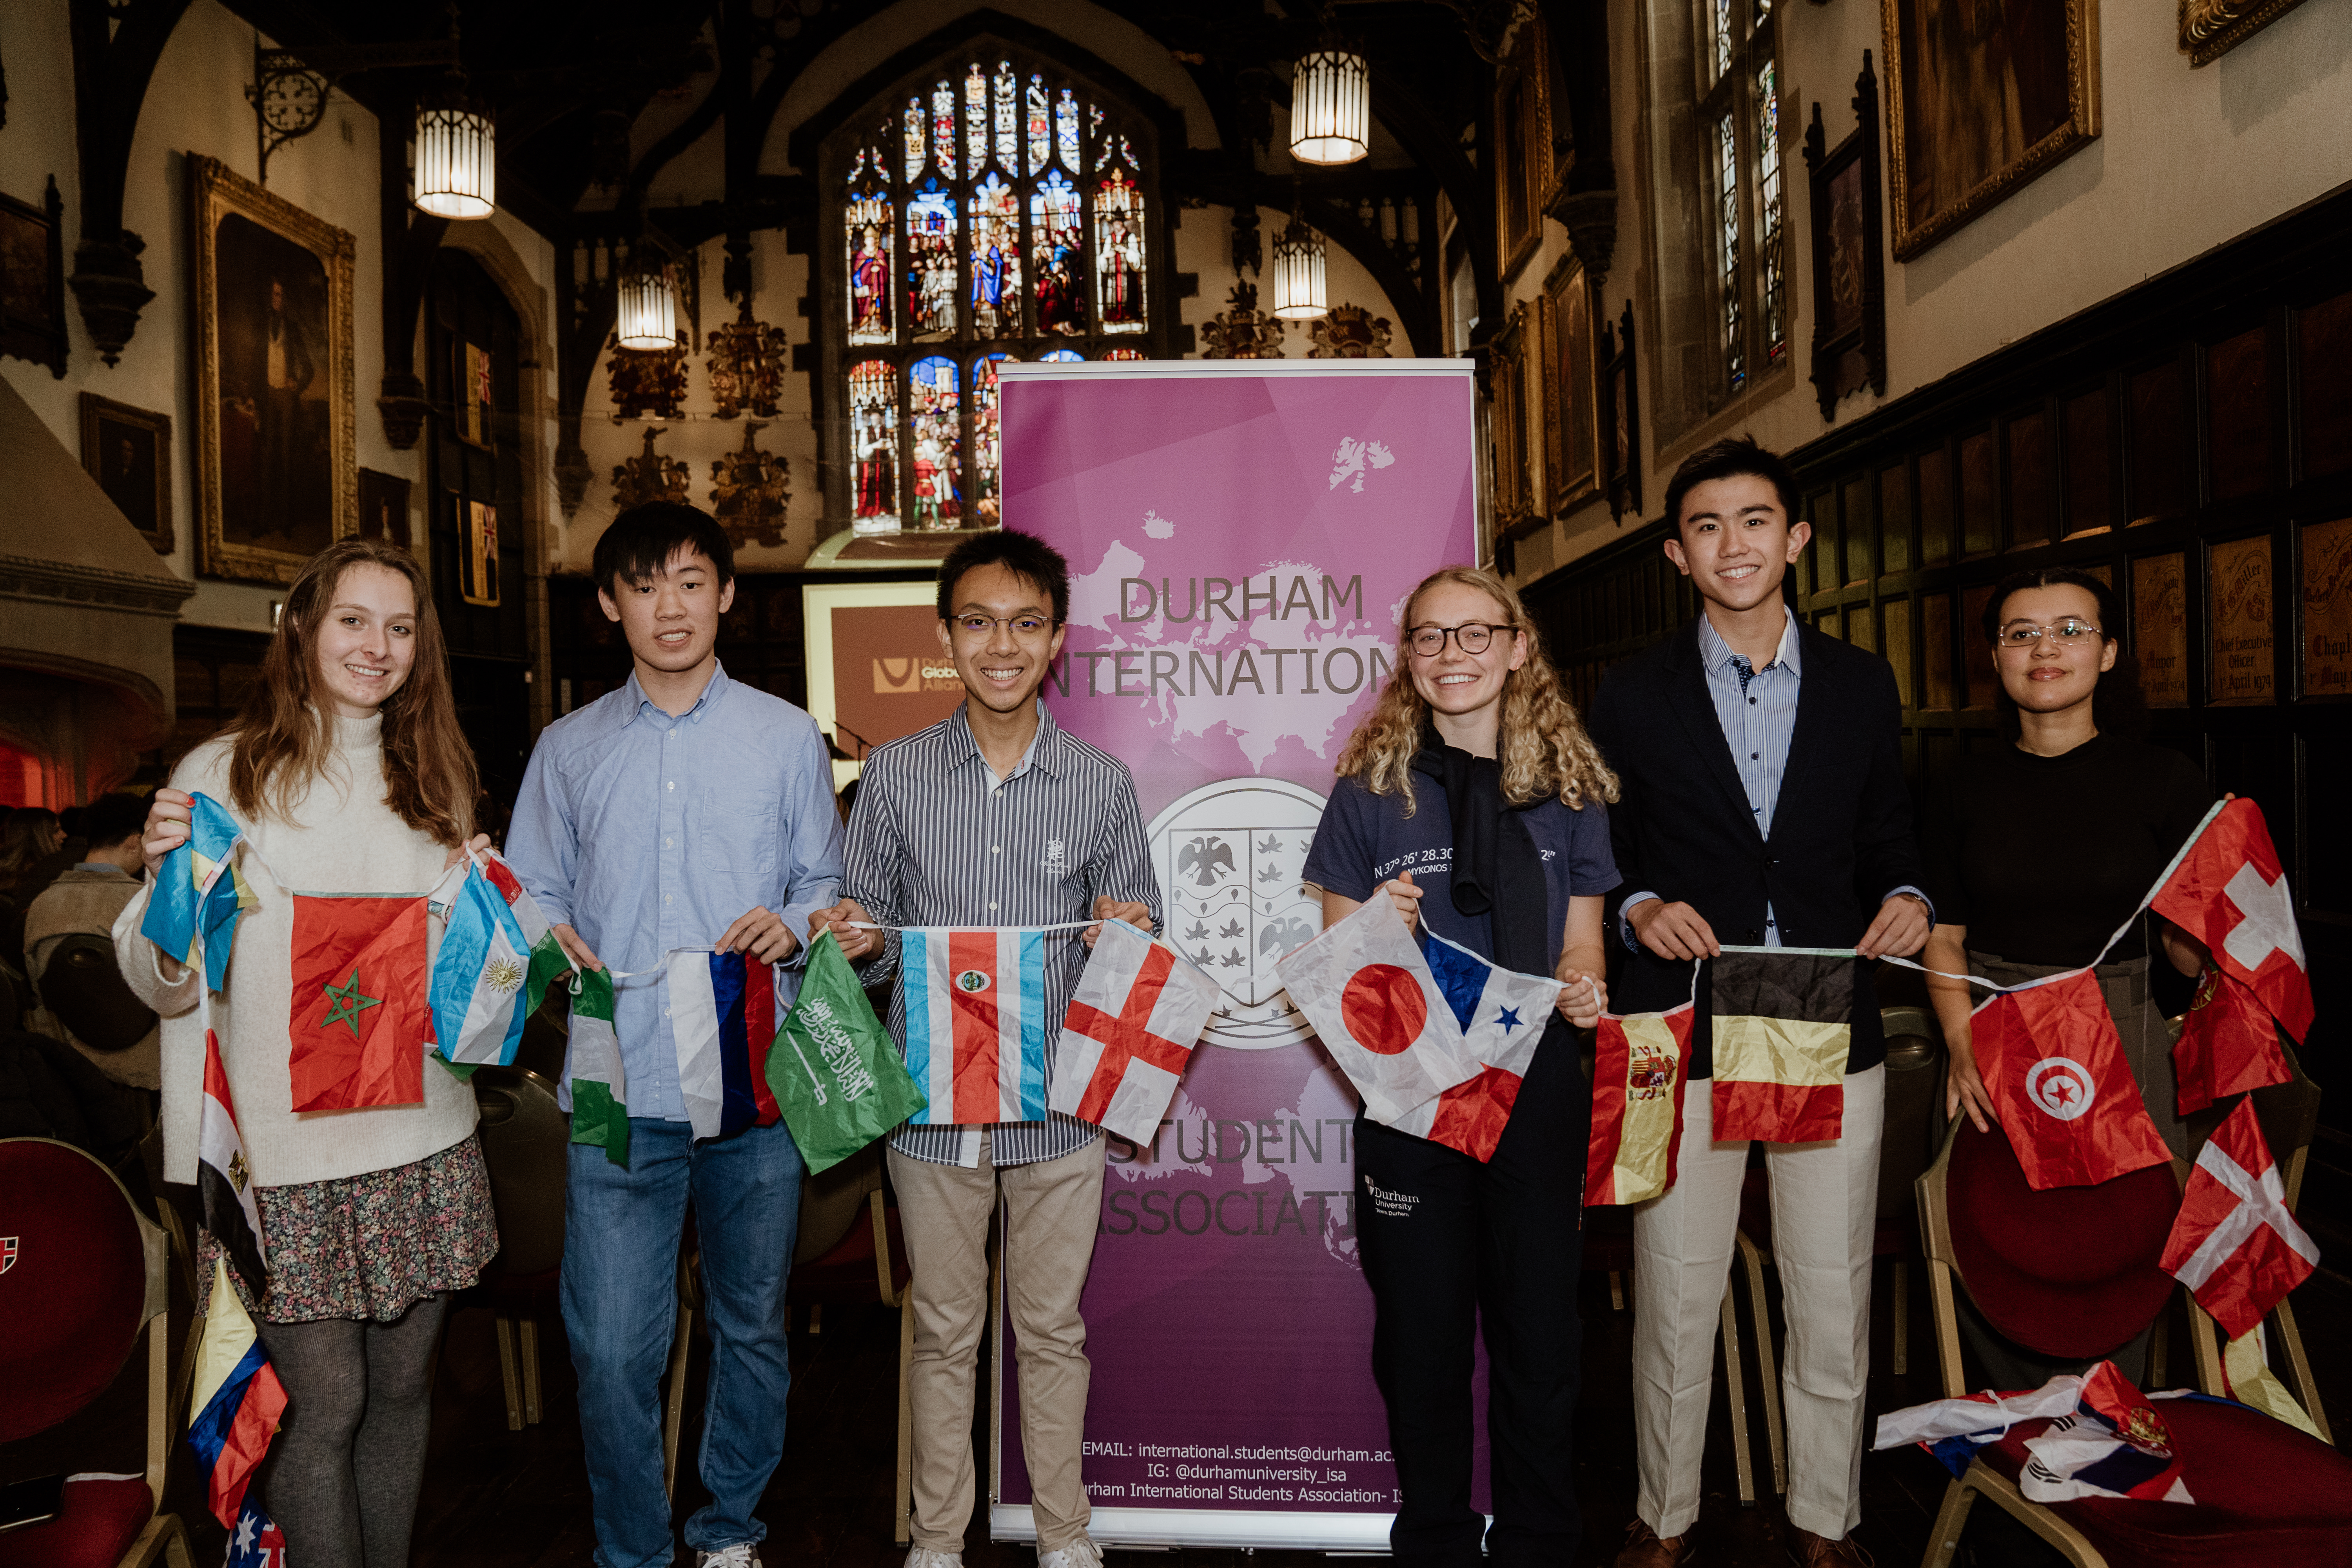 A group of international students holding flags at a civic reception event